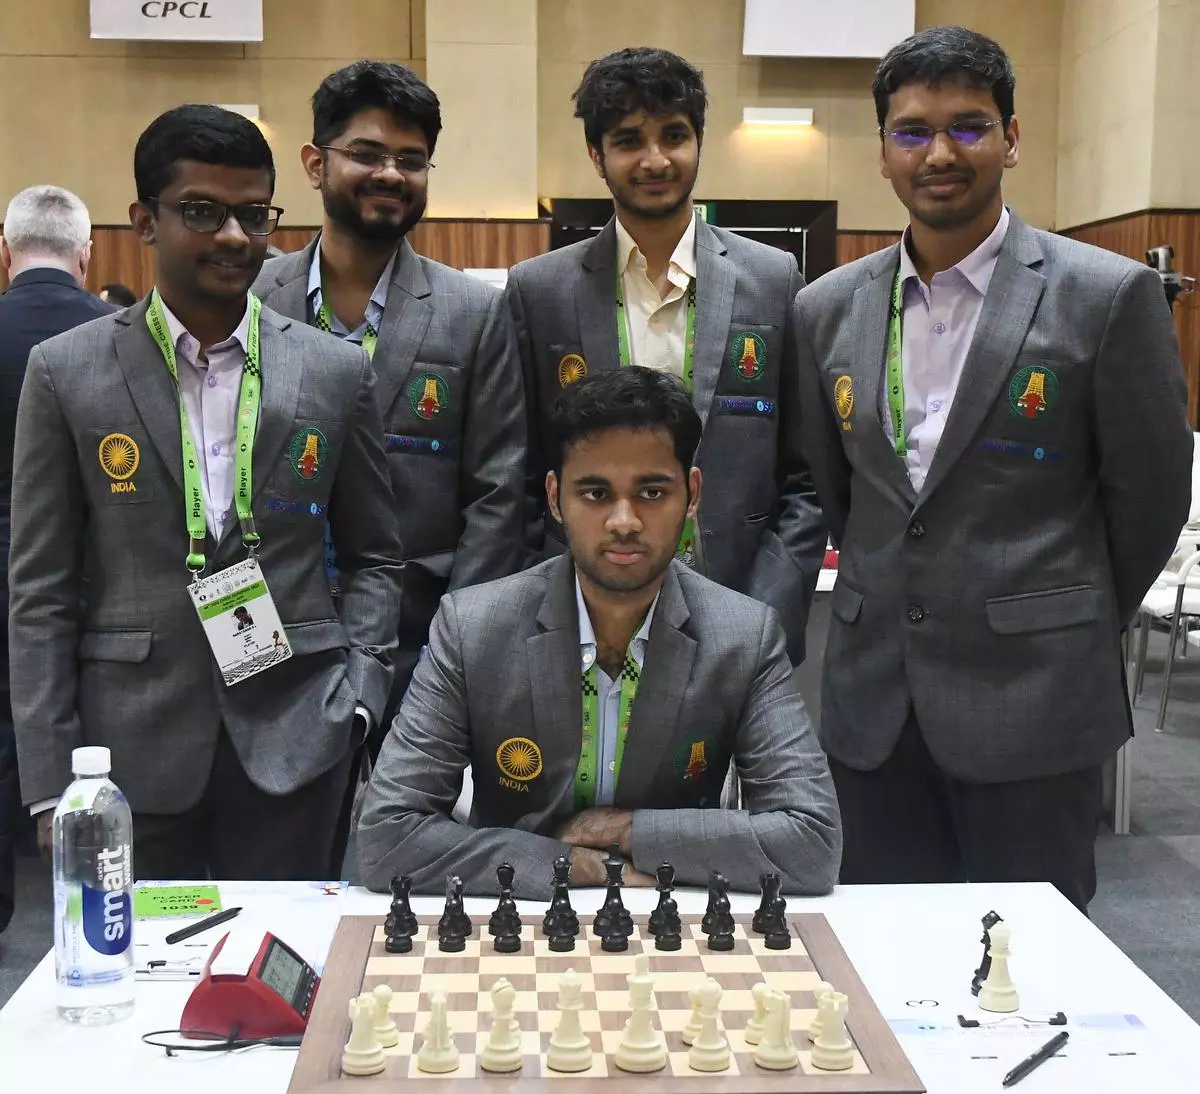 Chess players on the fifth day of the 44th Chess Olympiad held at Mamallapuram near Chennai on Tuesday